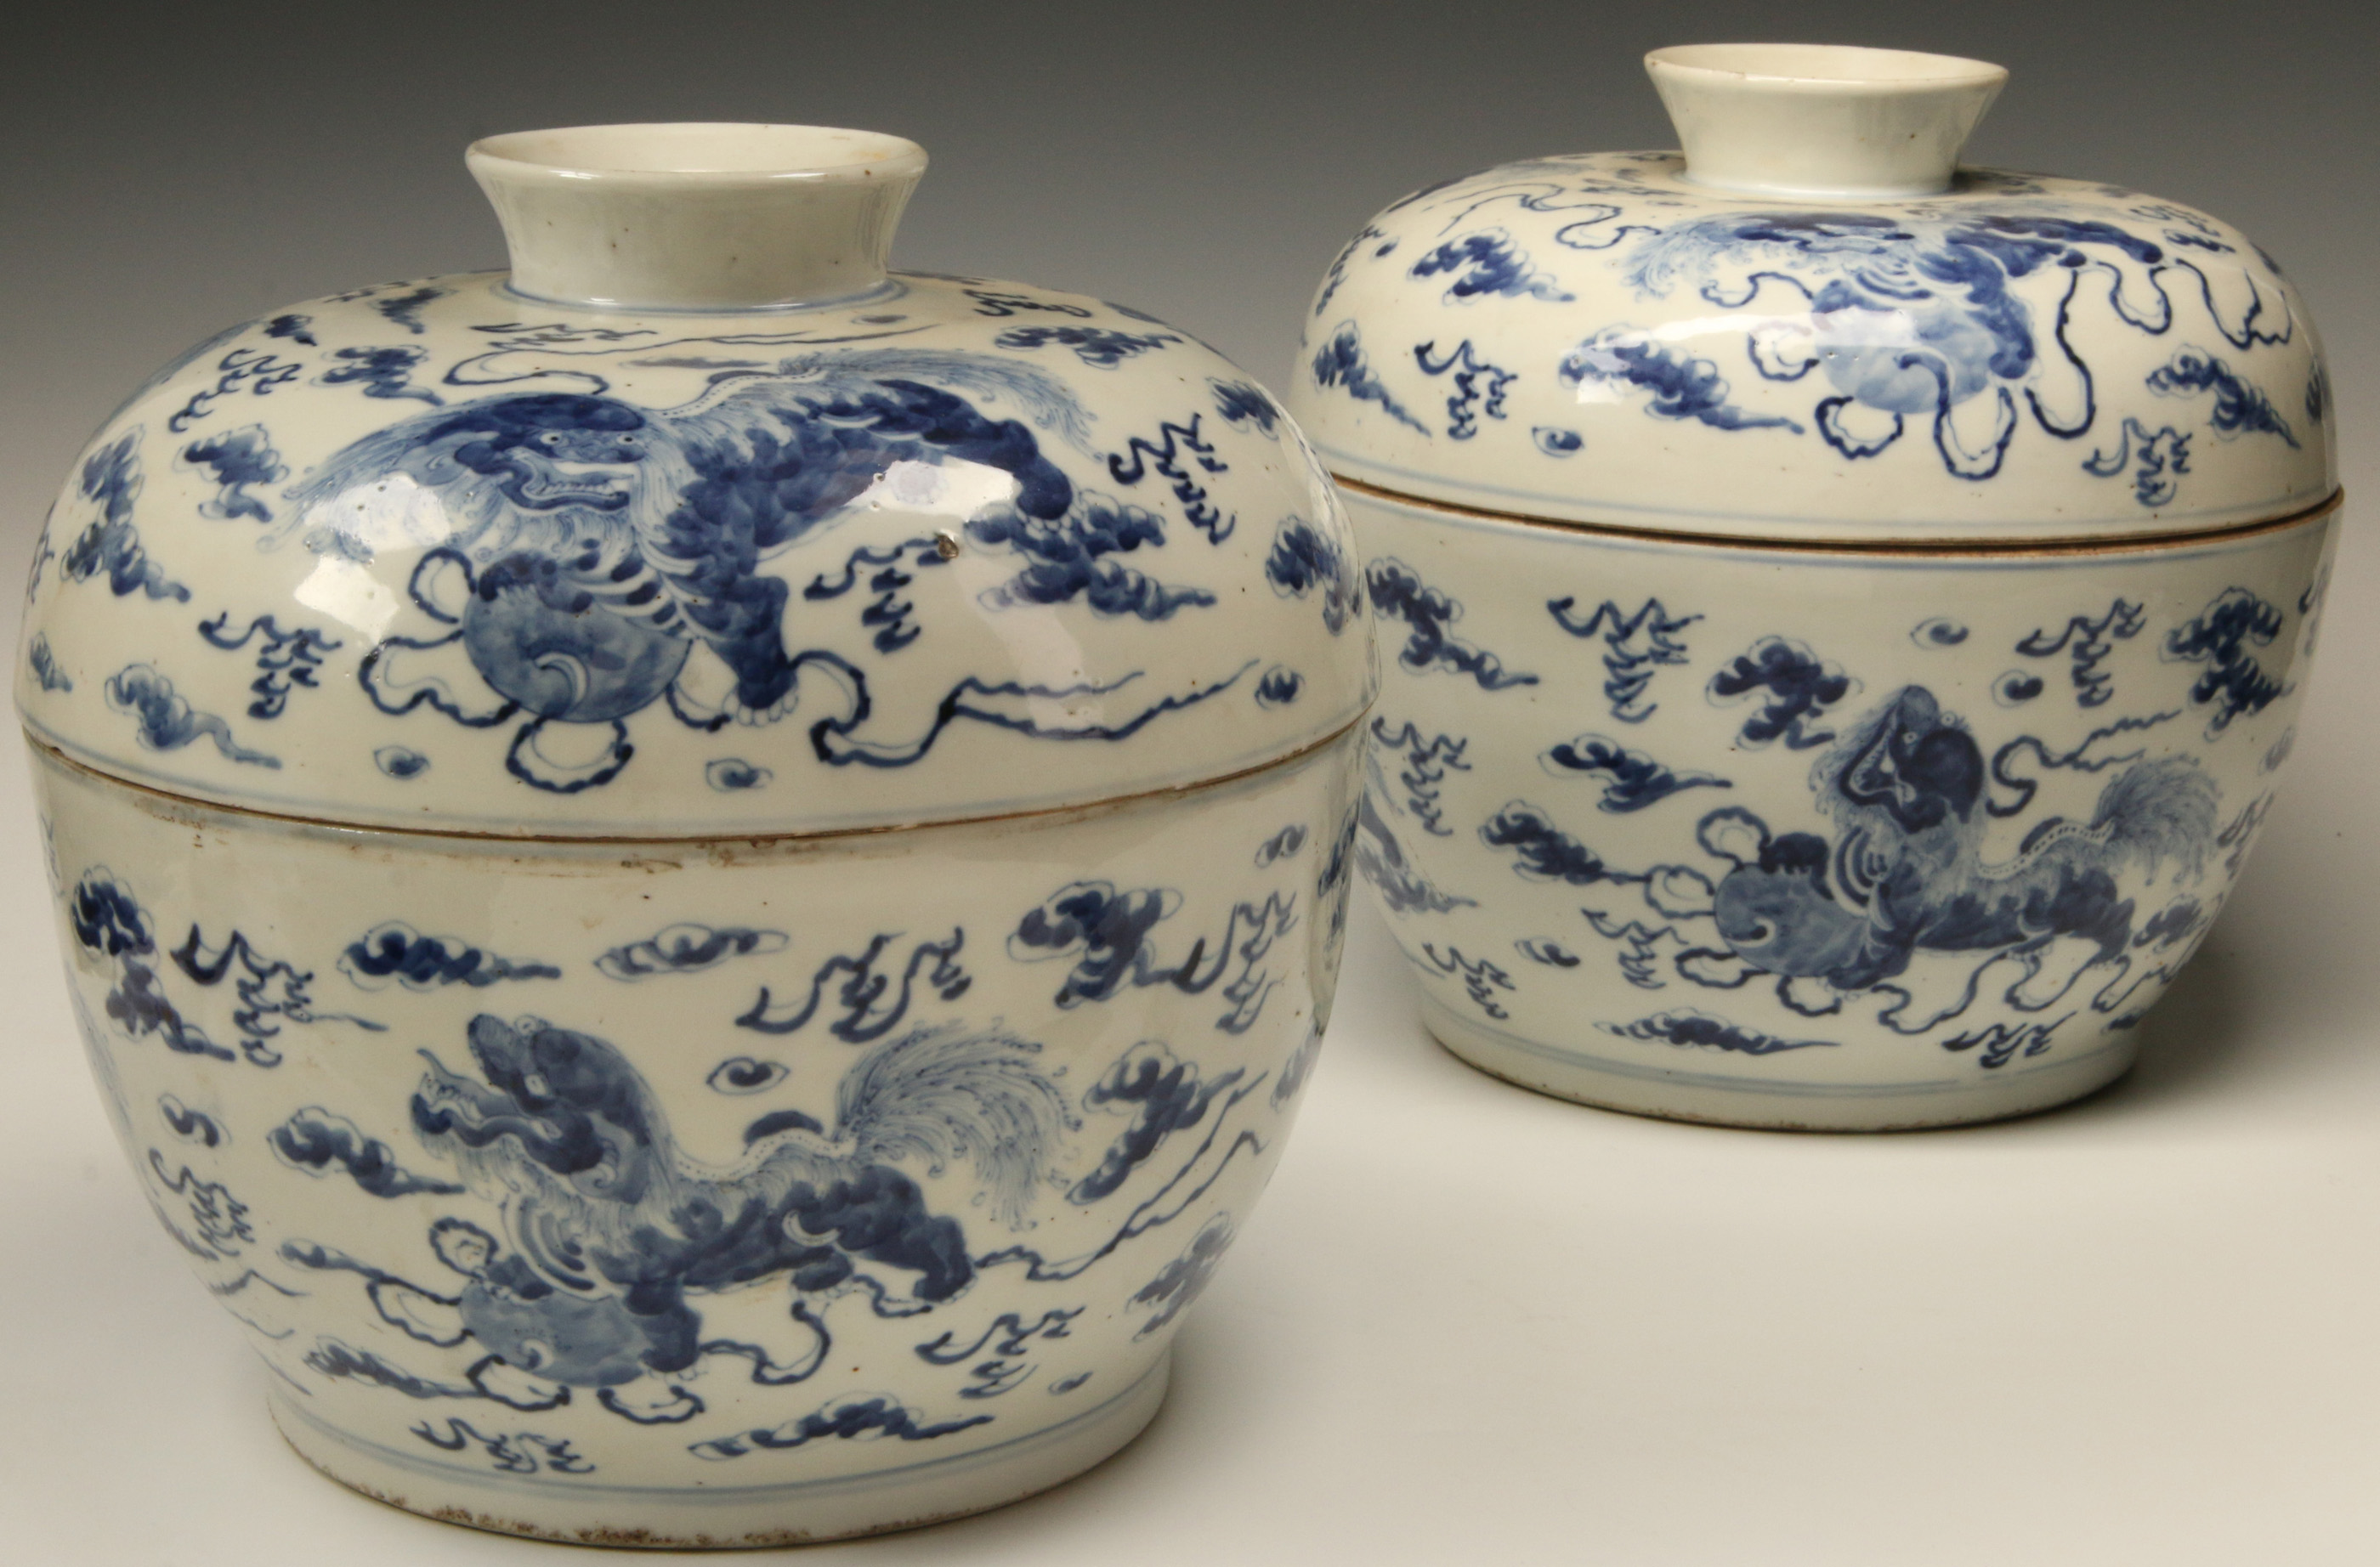 A PAIR OF ANTIQUE CHINESE BLUE AND WHITE PORCELAIN